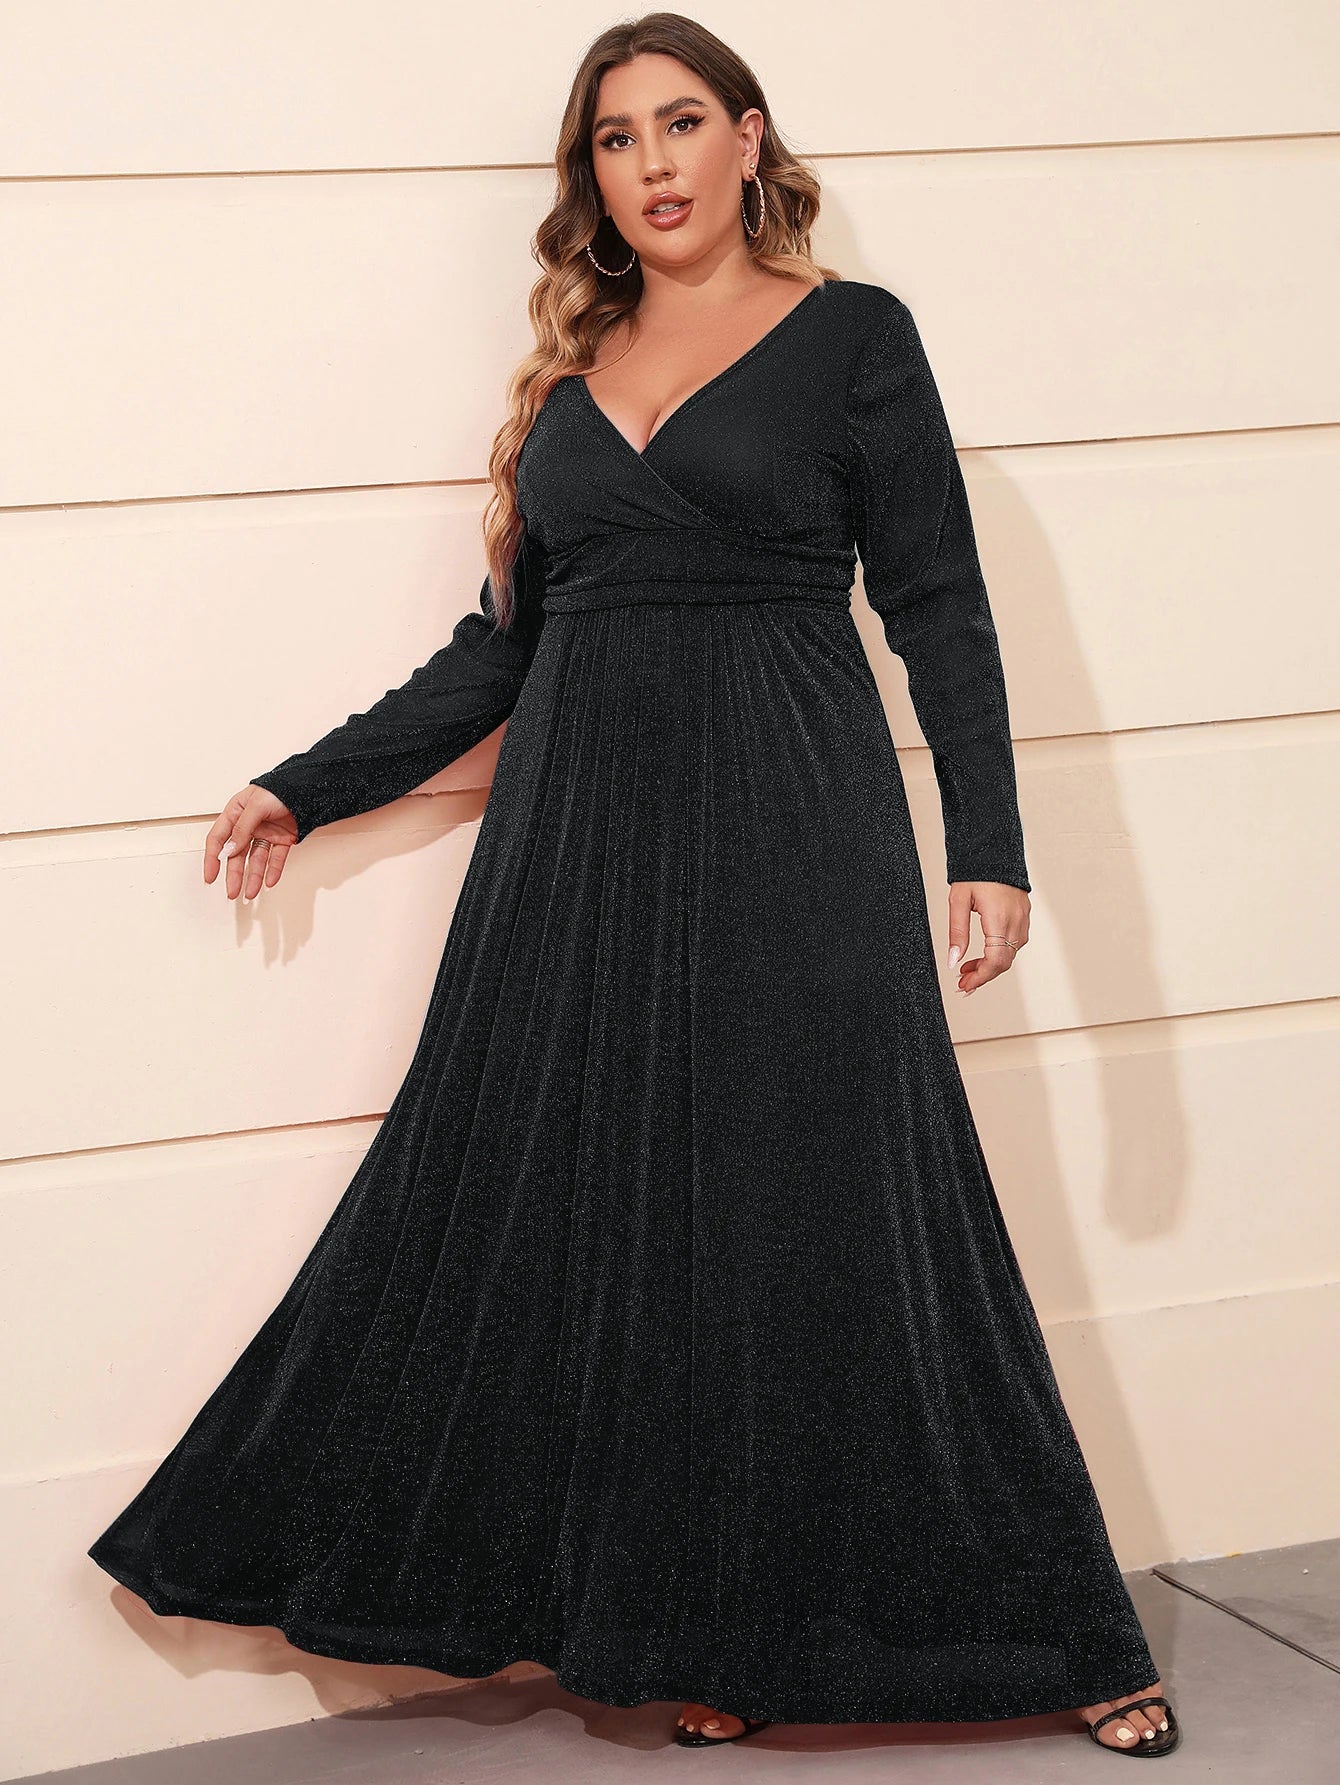 Plus Size New Arrival Long Sleeve V Neck Mesh Evening Party Formal Dresses For Women